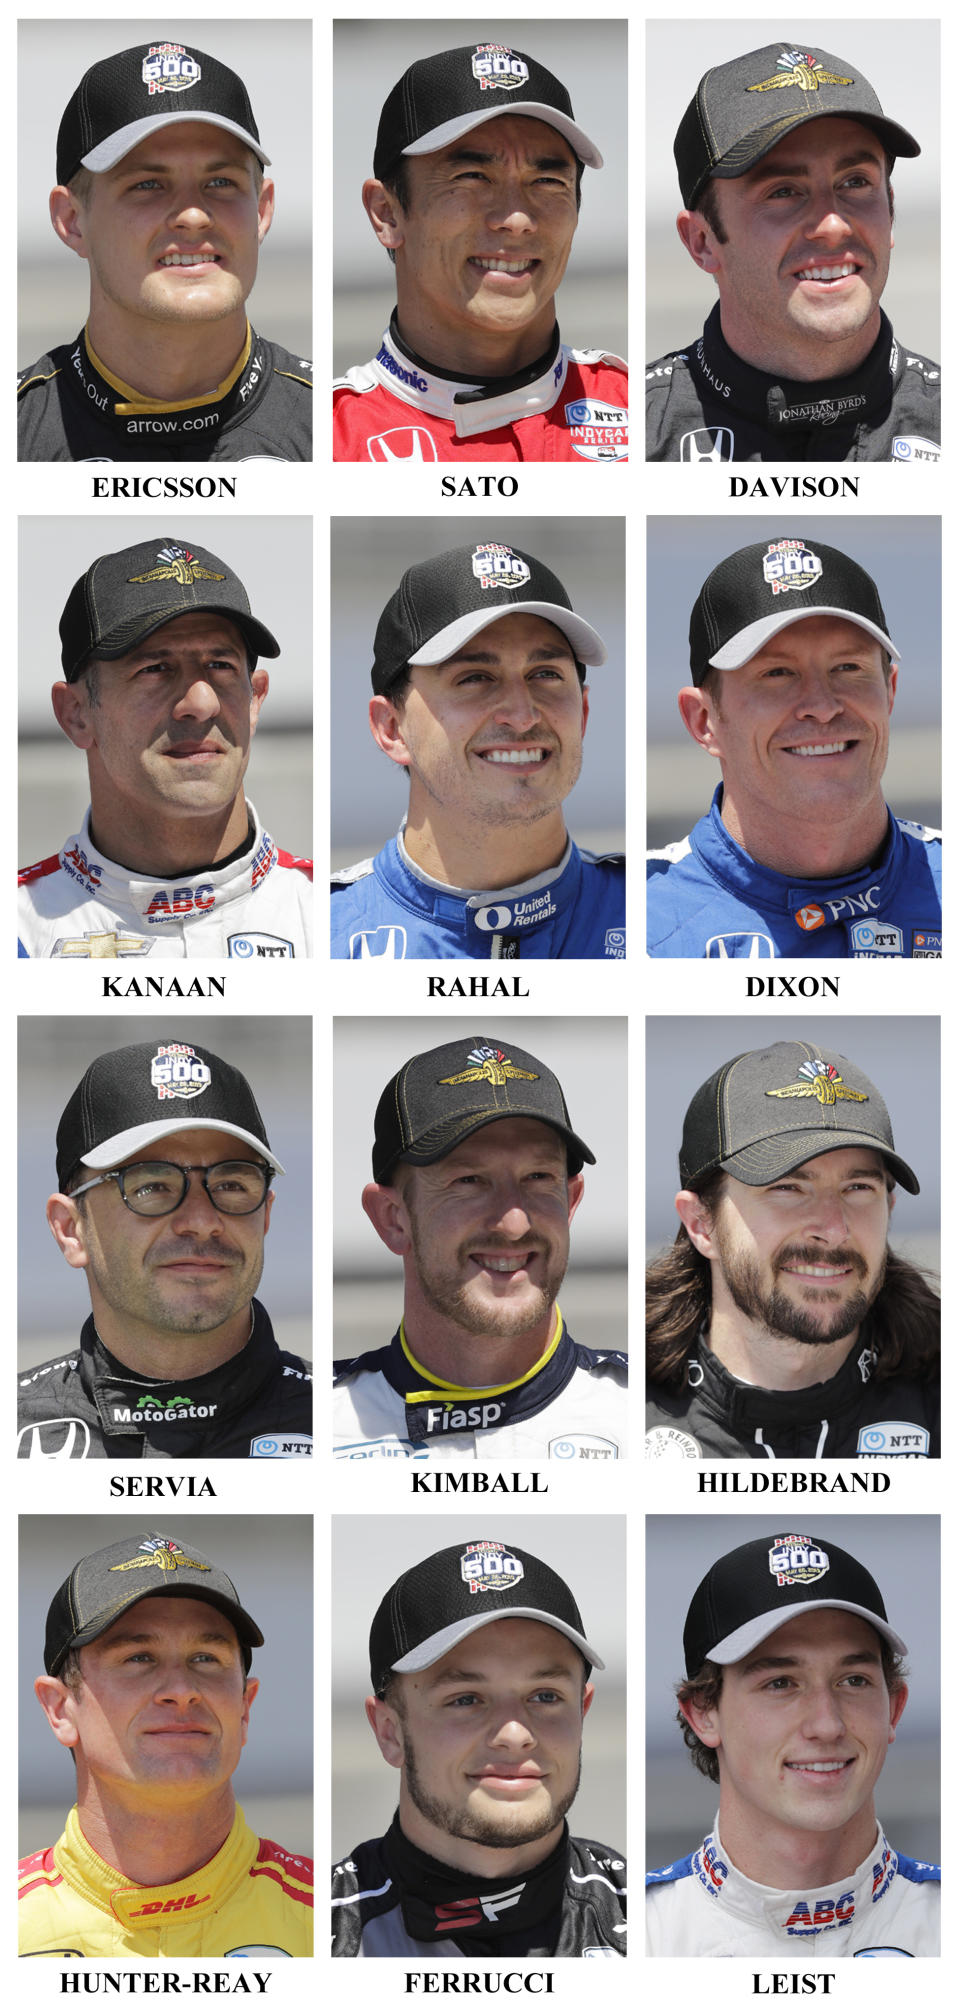 Drivers in the starting field for the May 26 Indianapolis 500 IndyCar auto race are shown after they qualified at the Indianapolis Motor Speedway in Indianapolis, Saturday, May 18, 2019. Fifth row: Marcus Ericsson, of Sweden, Takuma Sato, of Japan, and James Davison, of Australia. Sixth row: Tony Kanaan, of Brazil, Graham Rahal and Scott Dixon, of New Zealand. Seventh row: Oriol Servia, of Spain, Charlie Kimball and JR Hildebrand. Eight row: Ryan Hunter-Reay, Santino Ferrucci and Matheus Leist, of Brazil. (AP Photo/Dave Parker)